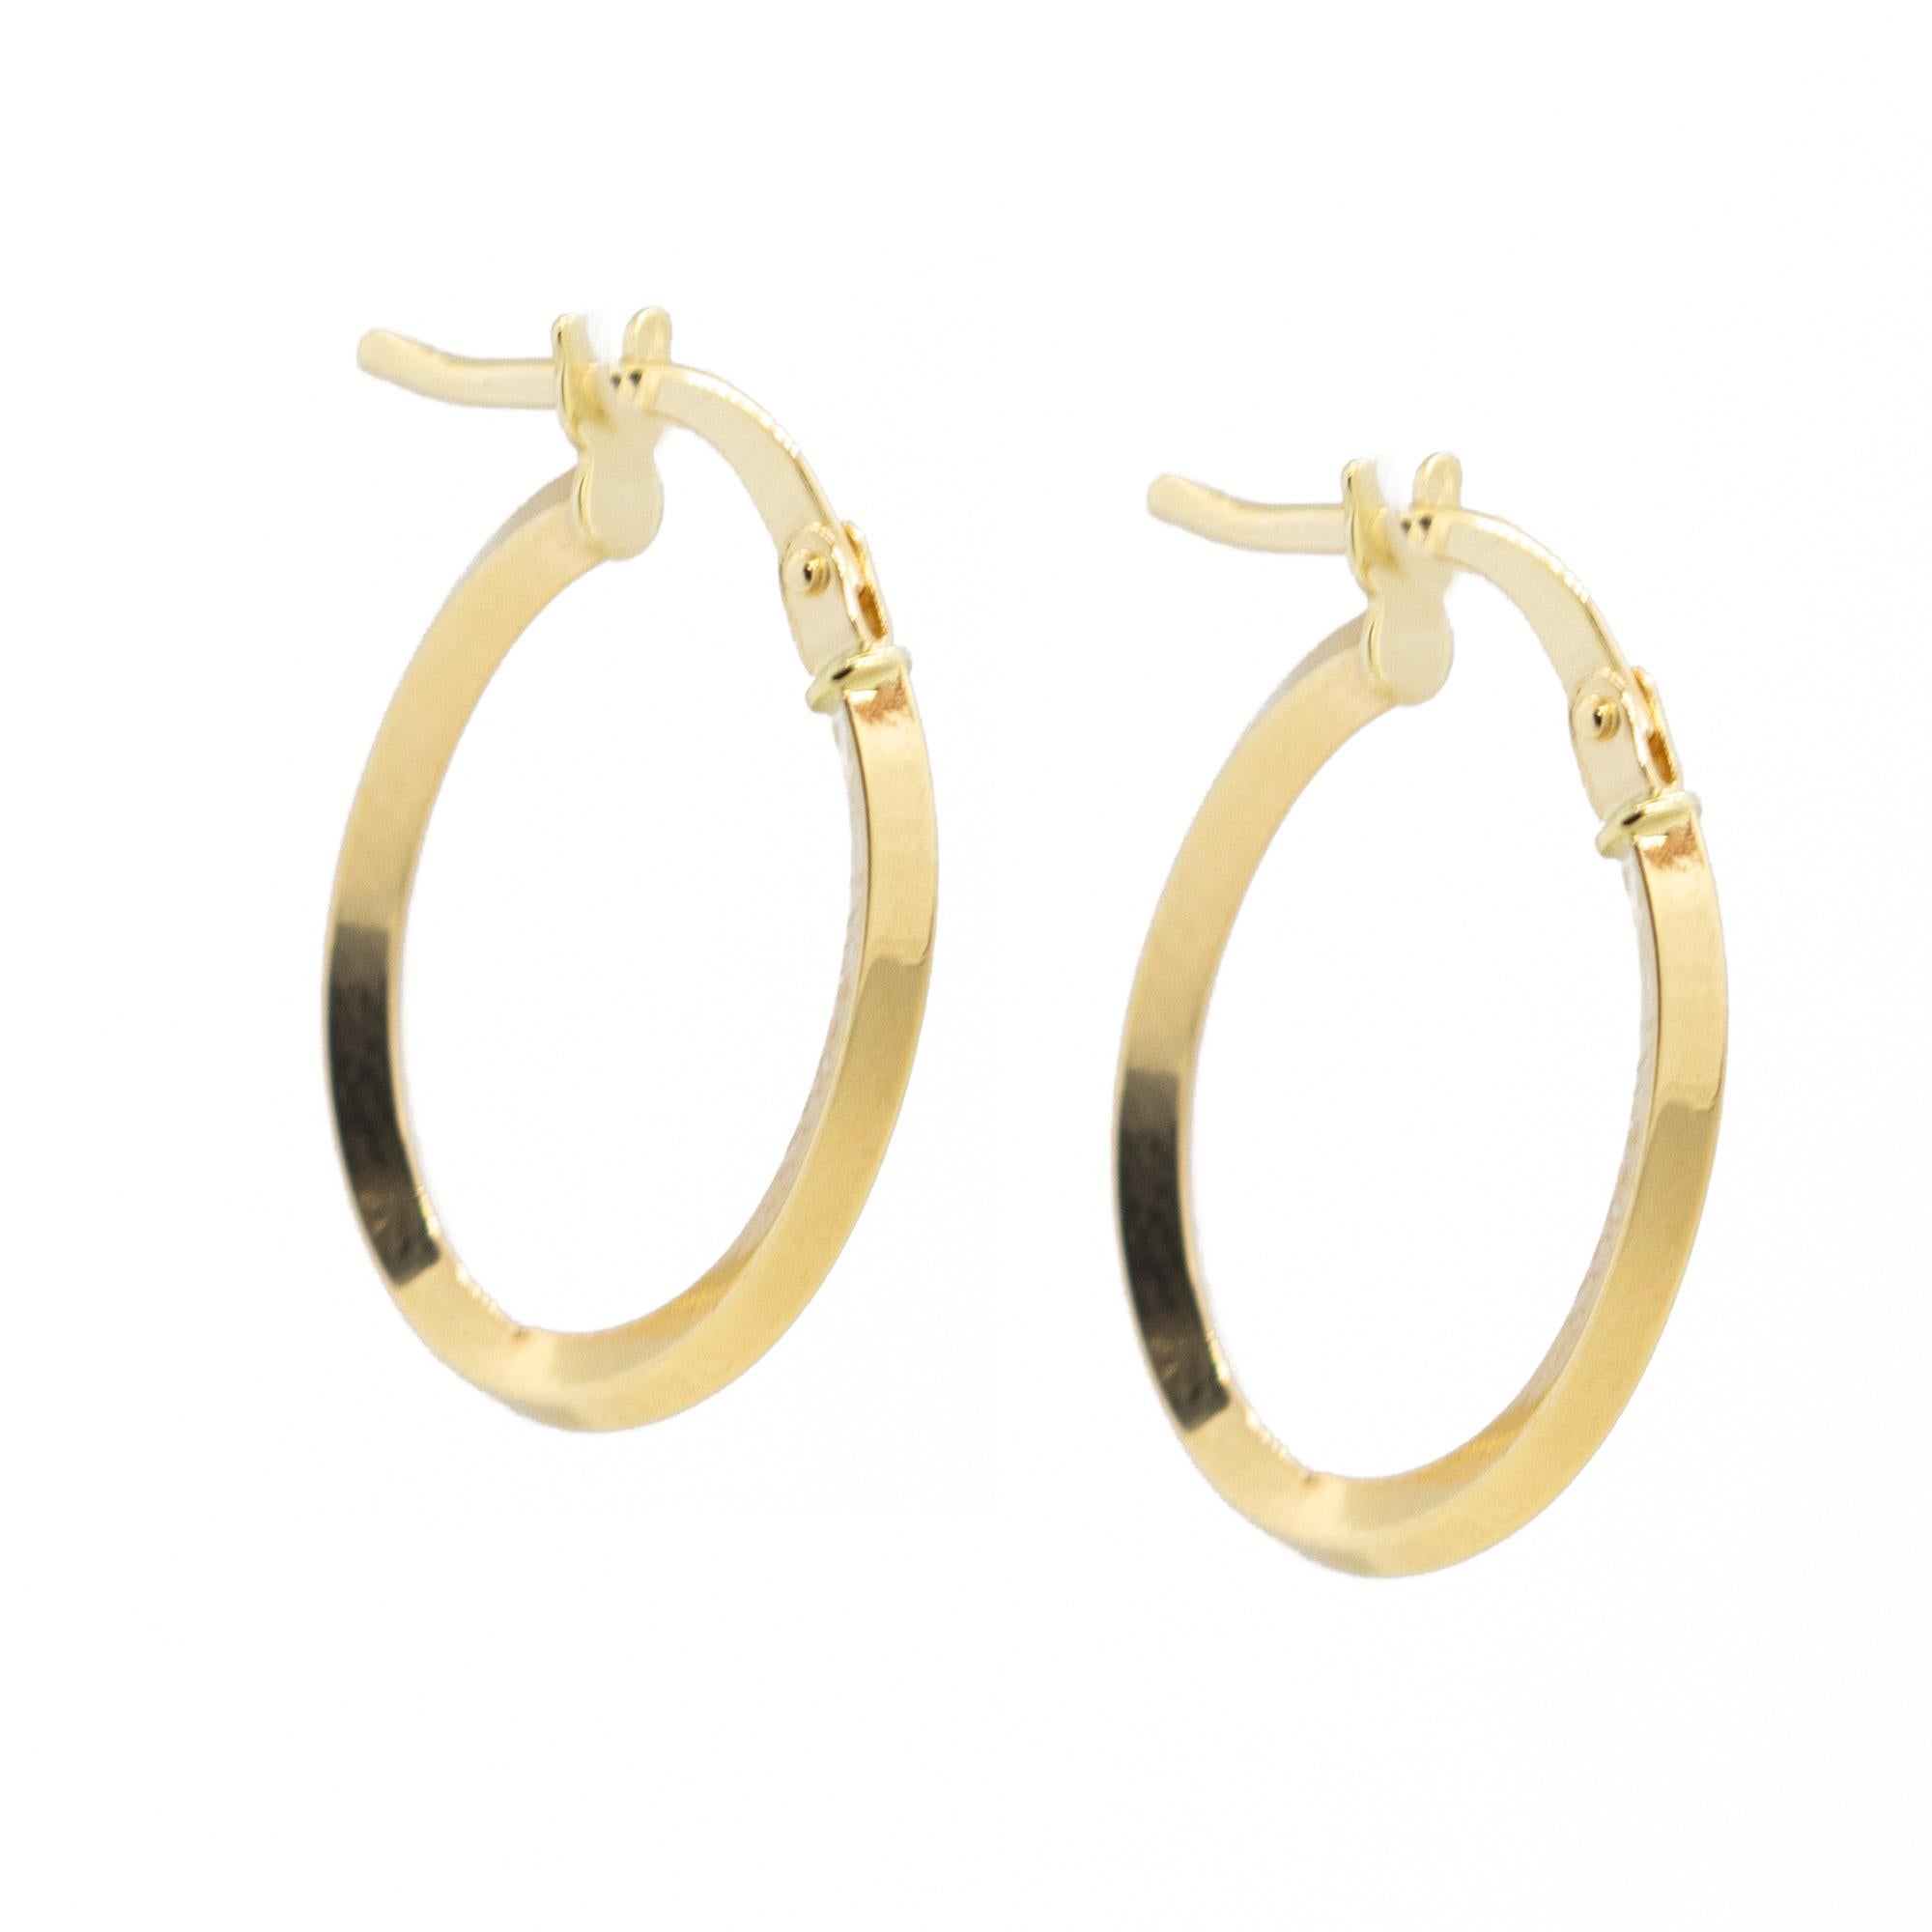 Elegant and Chic gold oval hoop earrings, in 14 karat solid Yellow Gold.

• 14k Yellow Gold (585 stamp)
• External size 2.0 x 1.5 cm, thickness 0.2 cm
• Total Weight 1.0 g, each earring 0.5 g

The shape and color might vary according to the unique